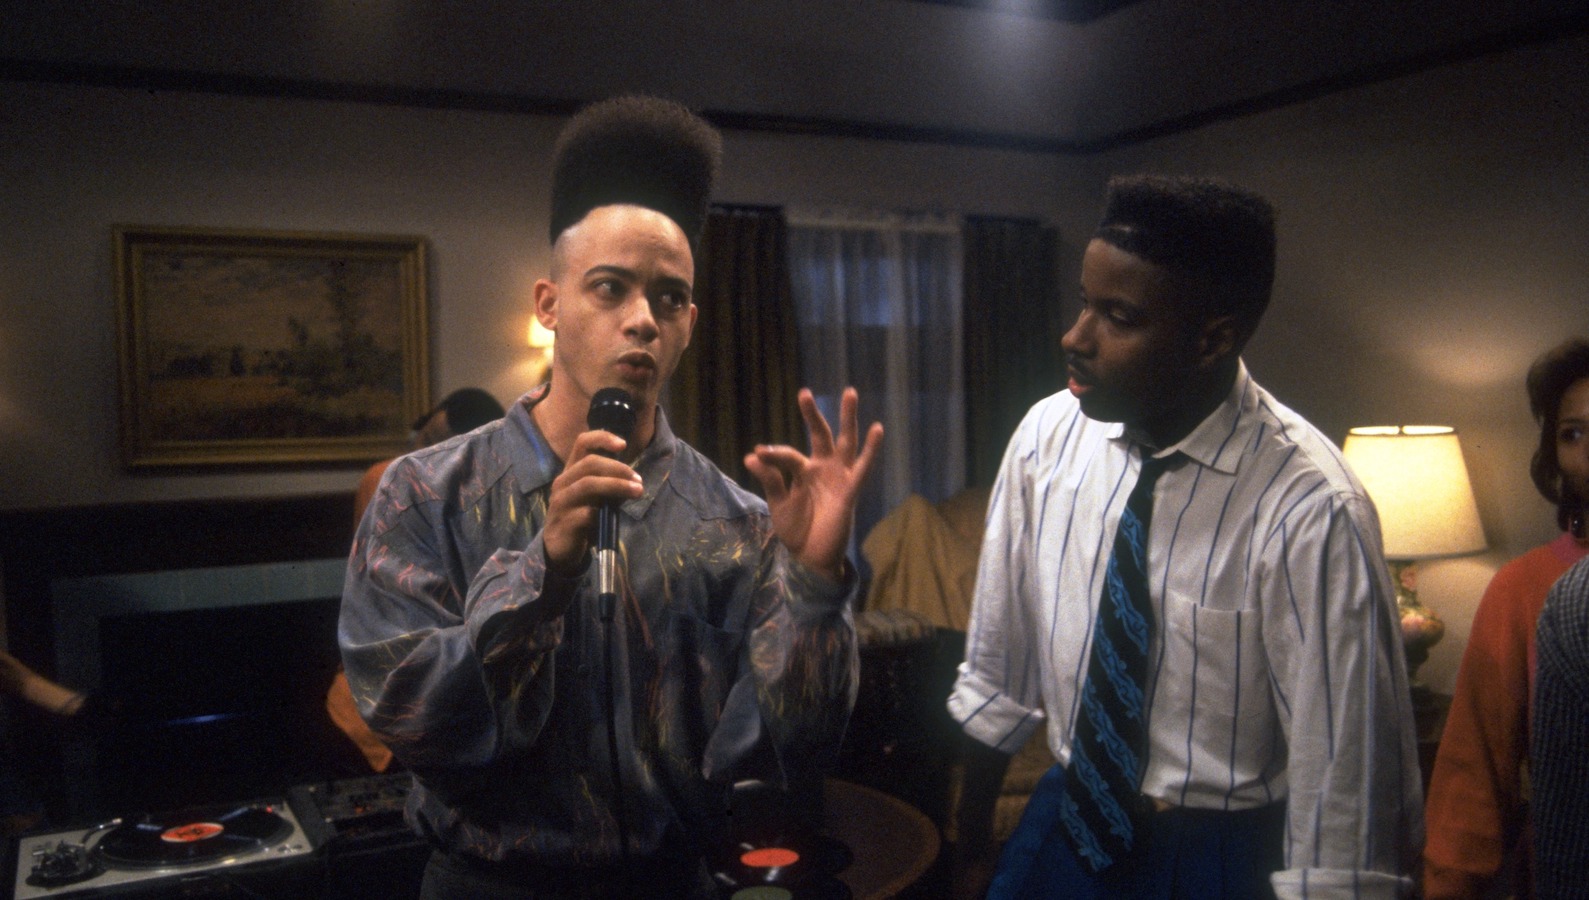 A man with a tall afro hairdo stands in a living room talking into a microphone while another man, wearing a shirt and tie, looks at him curiously